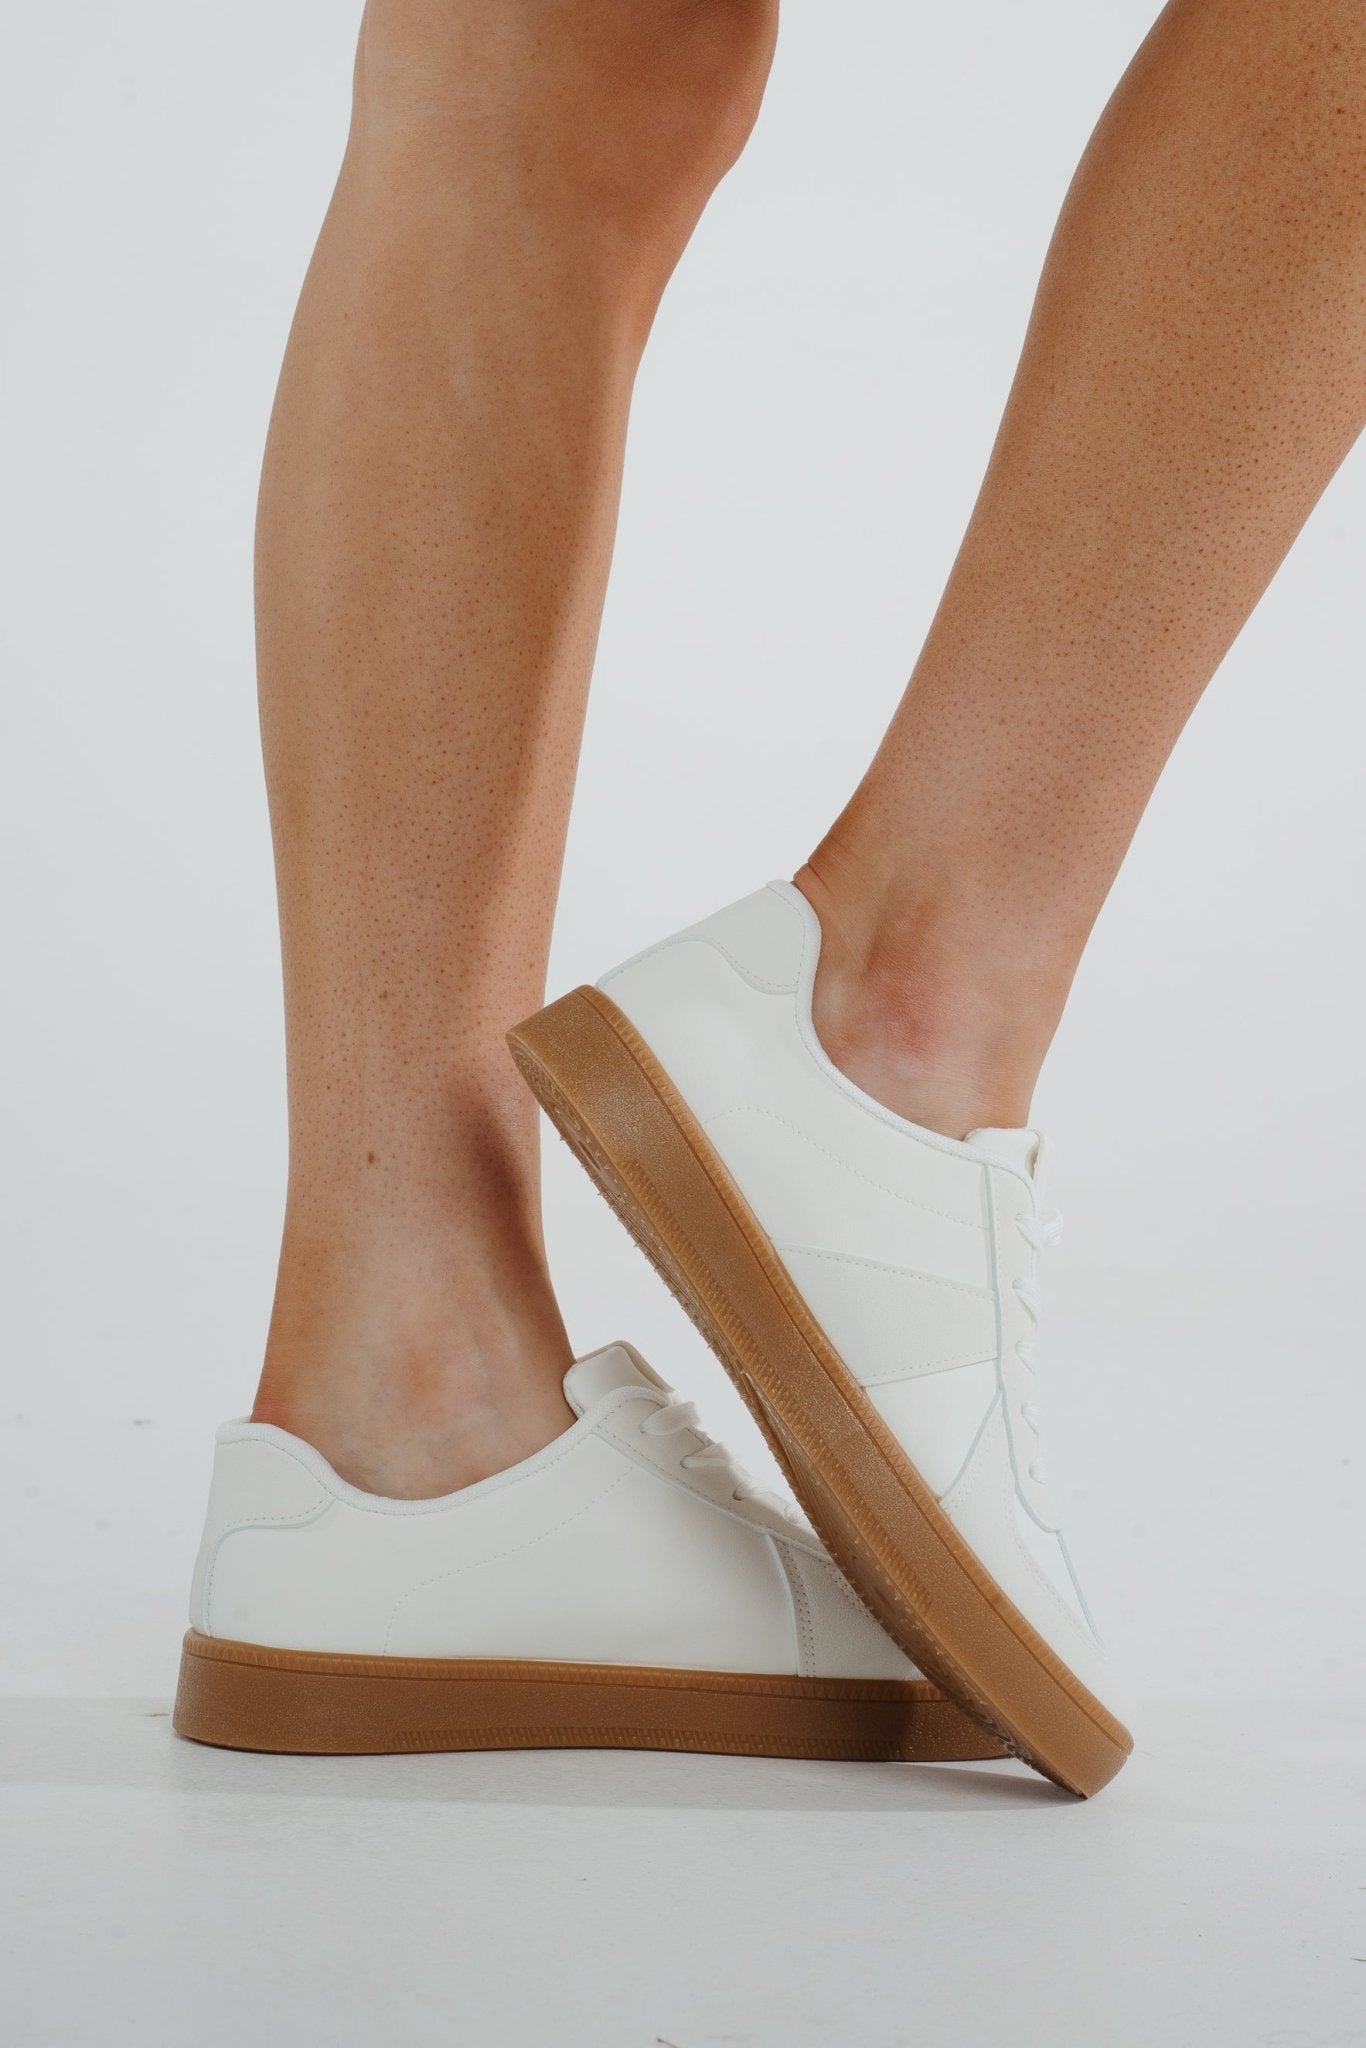 Sadie Faux Suede Mix Trainer In White - The Walk in Wardrobe